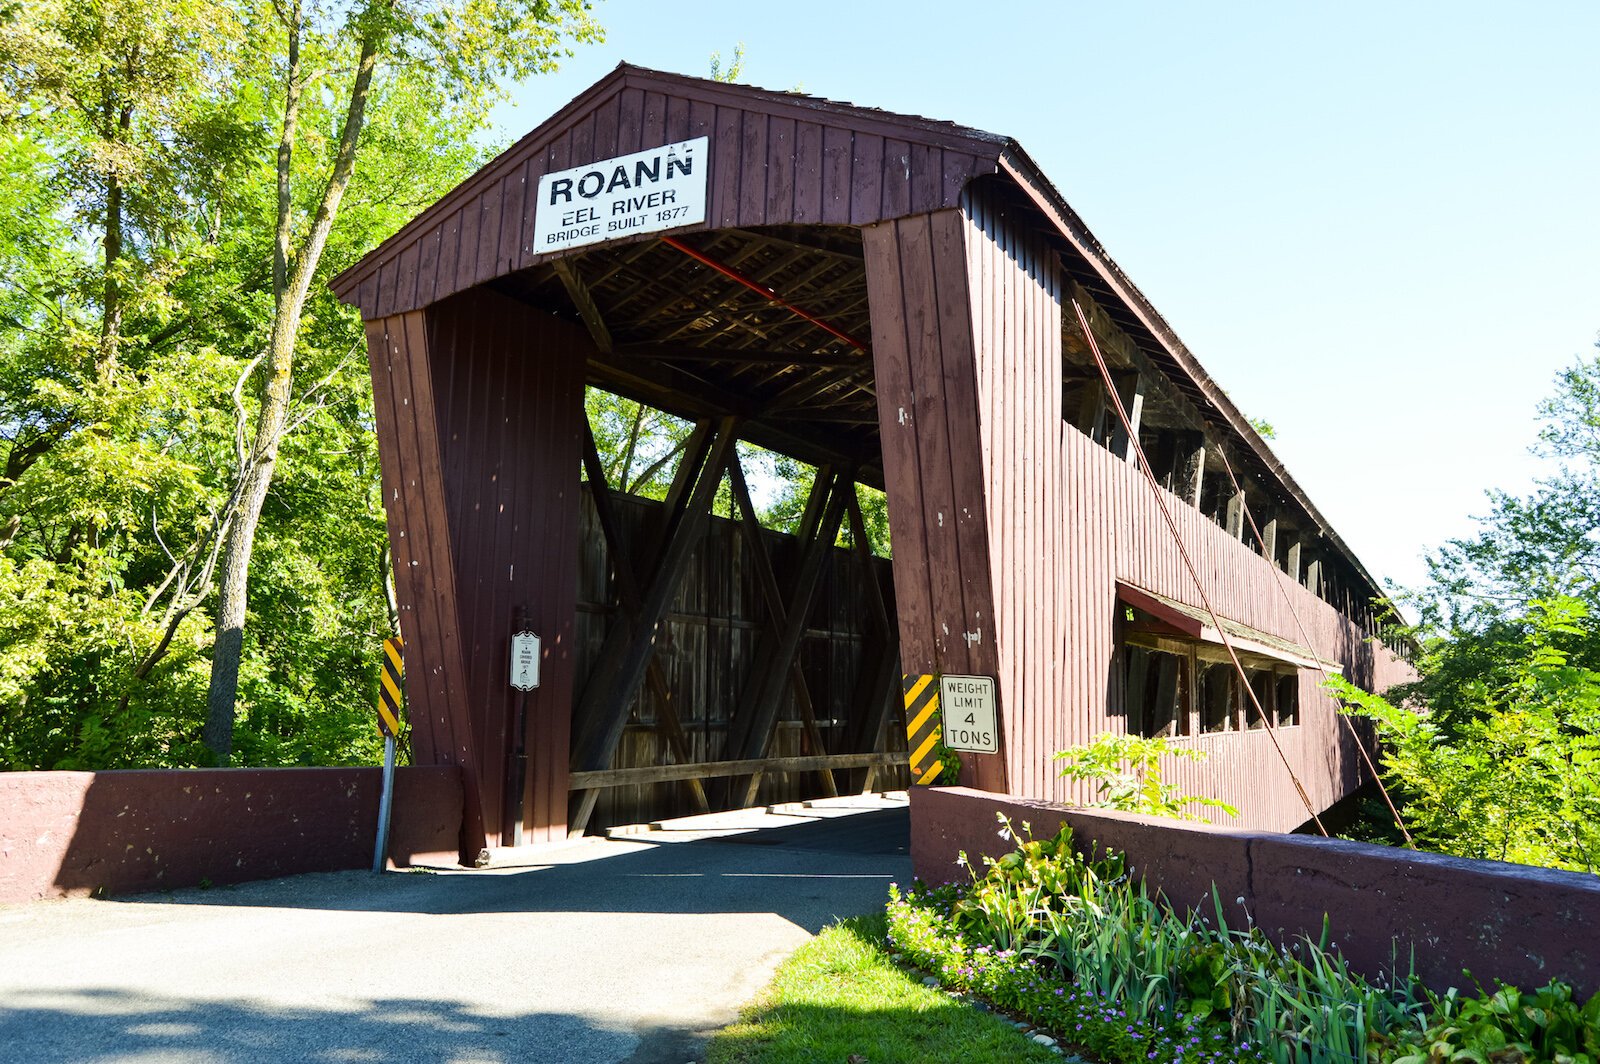 The Roann Covered Bridge is located at 6000 Roann Lukens Lake Rd.